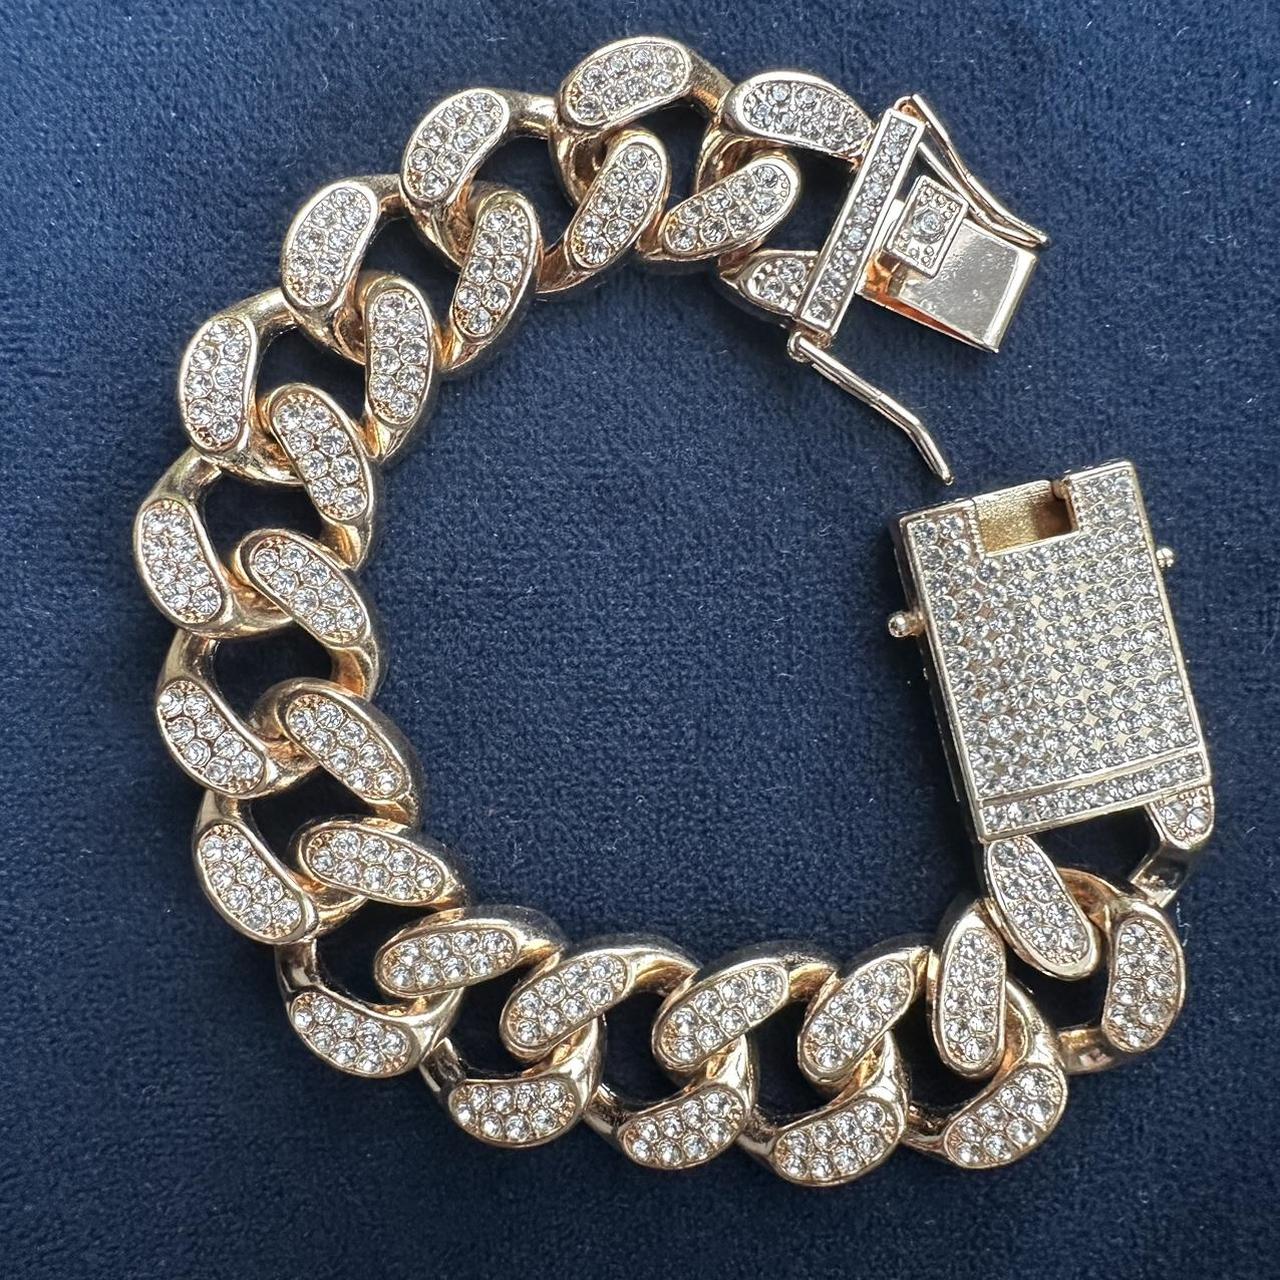 8” Iced Cuban Chain Bracelet Please see video for... - Depop